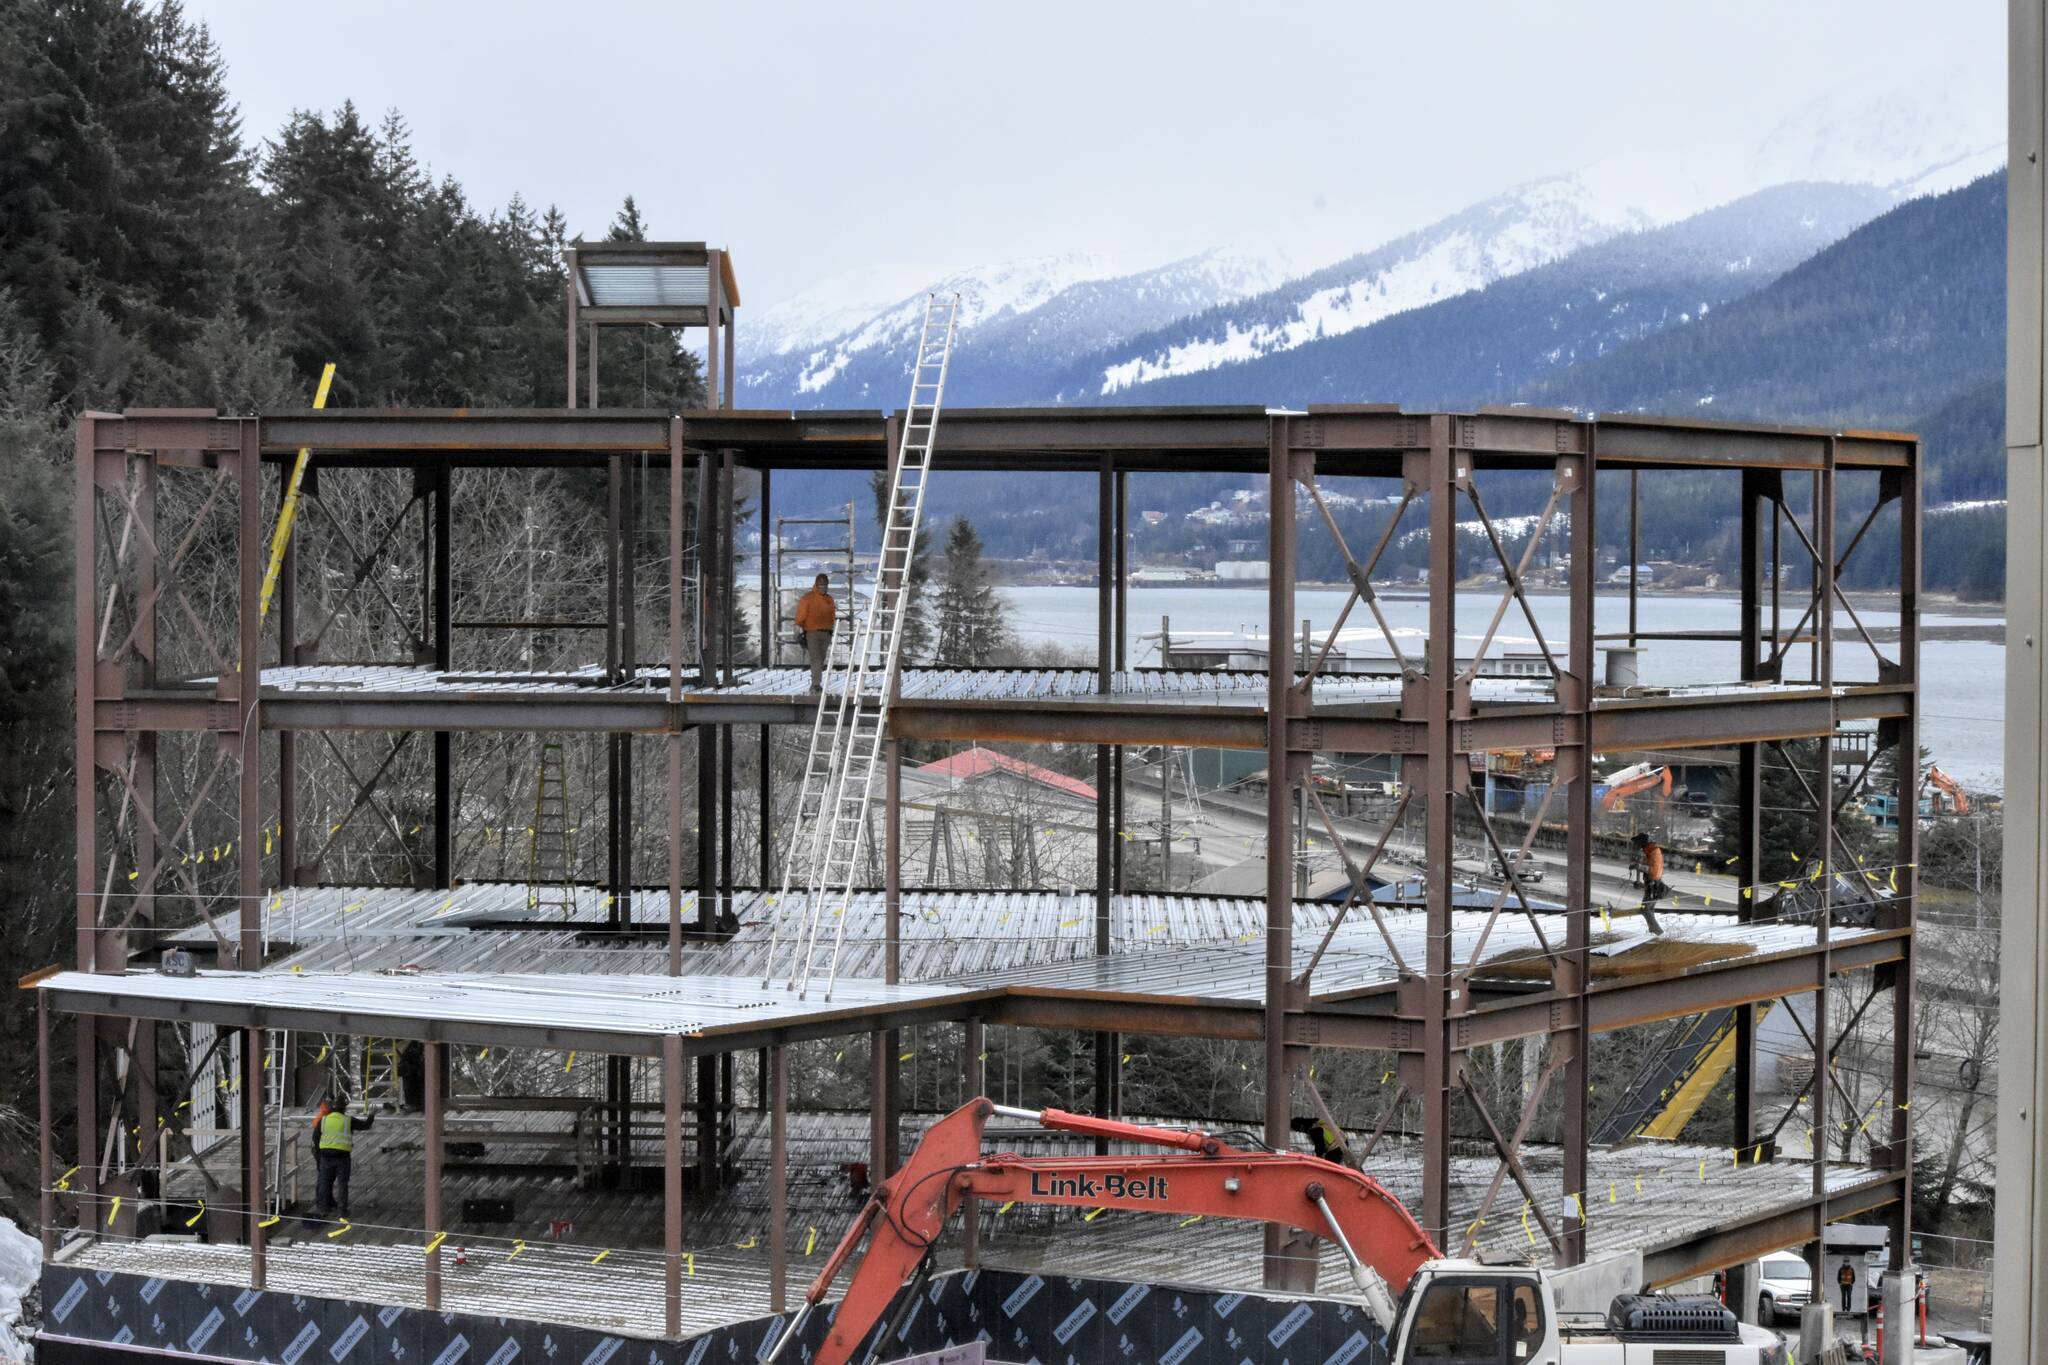 Bartlett Regional Hospital's new crisis stabilization center was under construction on Thursday, March 24, 2022, and is slated to open next year. Hospital staff said the center will help the hospital address the high number of behavioral health needs in the Juneau community. (Peter Segall / Juneau Empire)